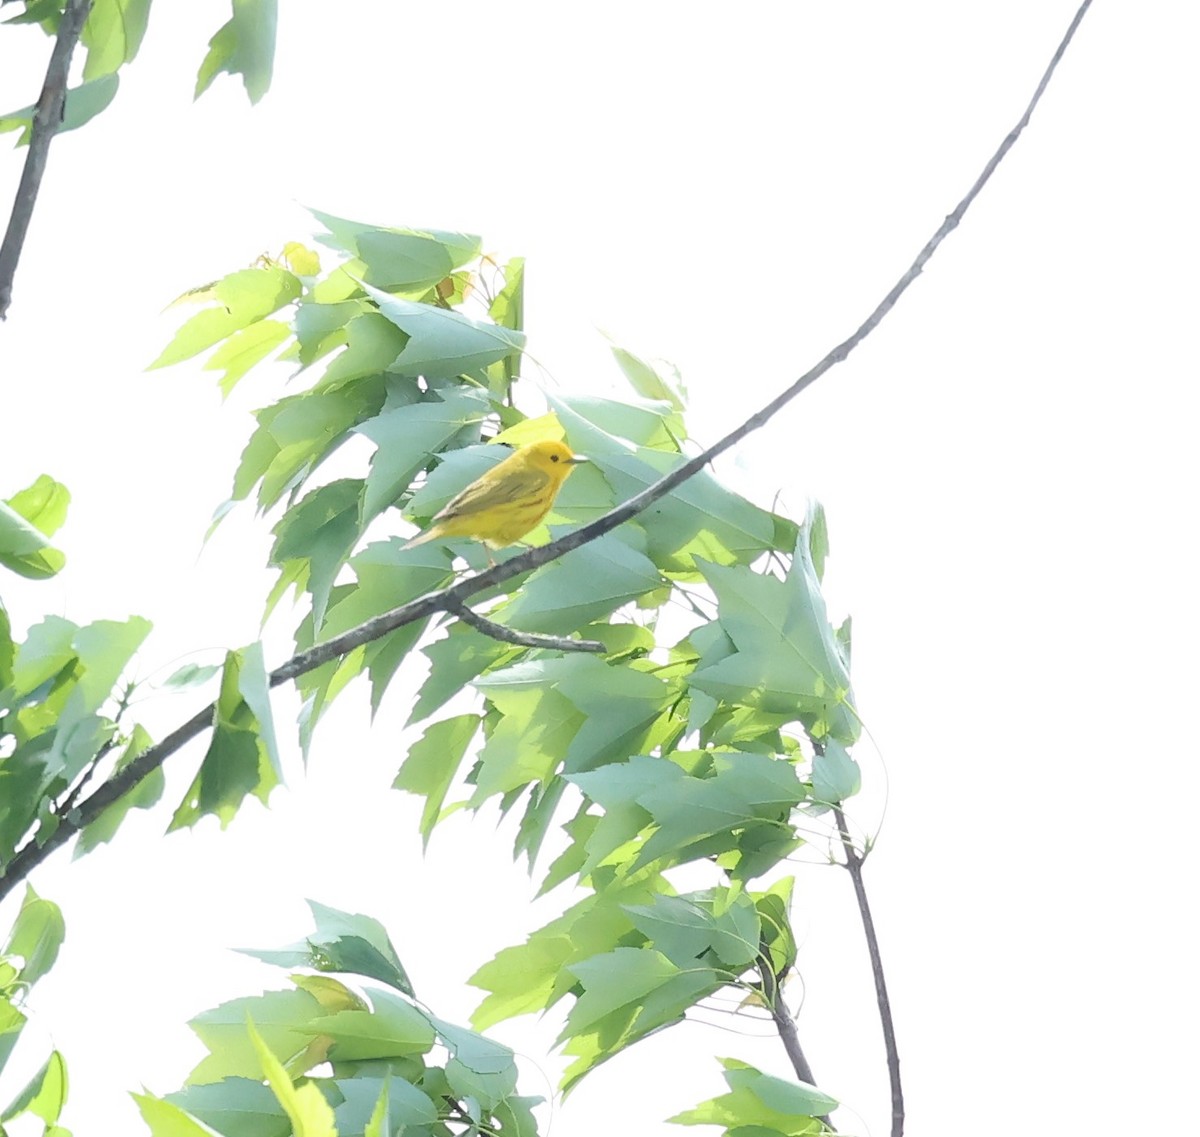 Yellow Warbler - Marie Provost